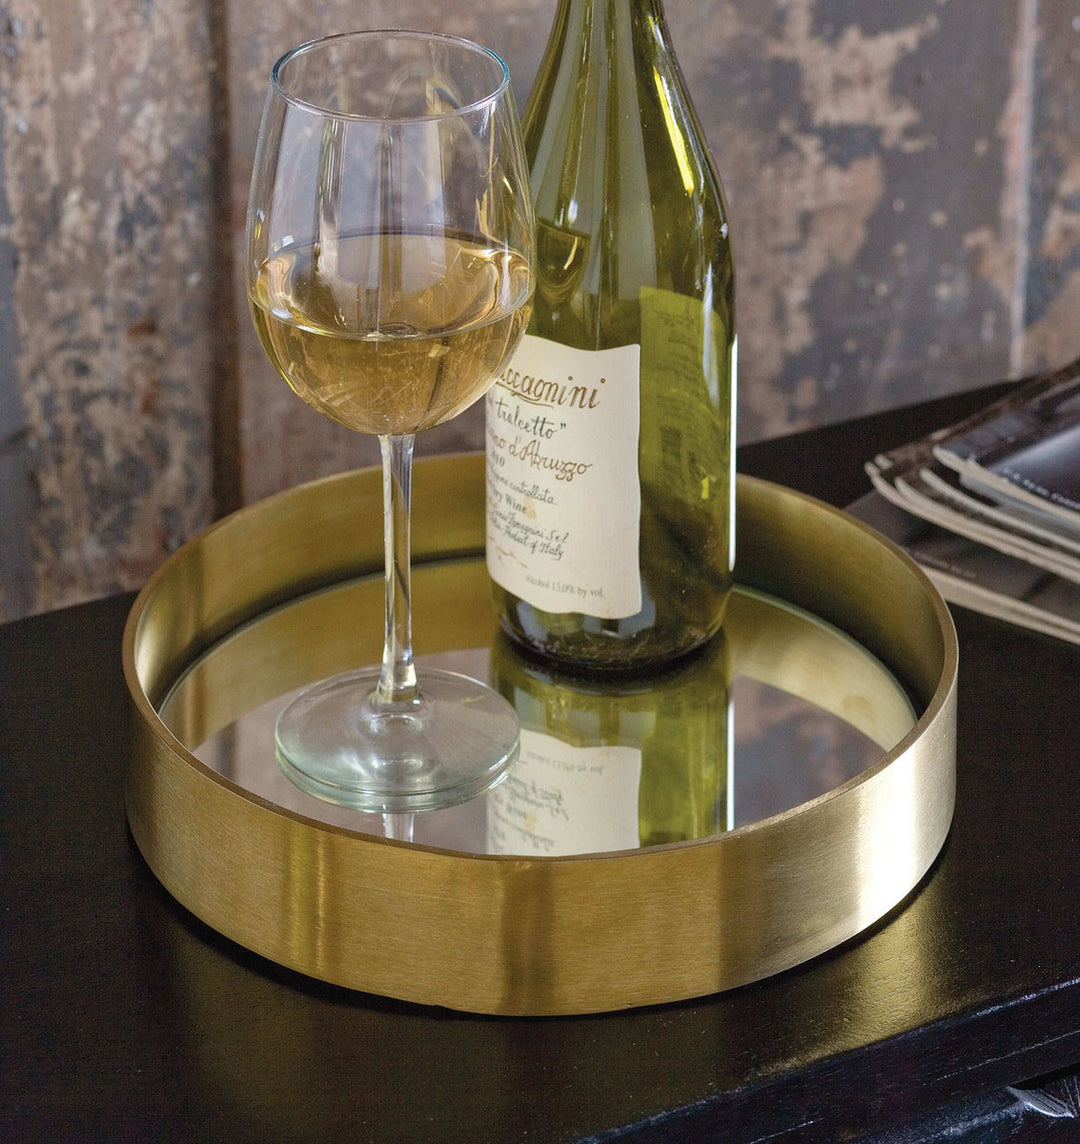 Glam serving tray holding a wine bottle and glass.